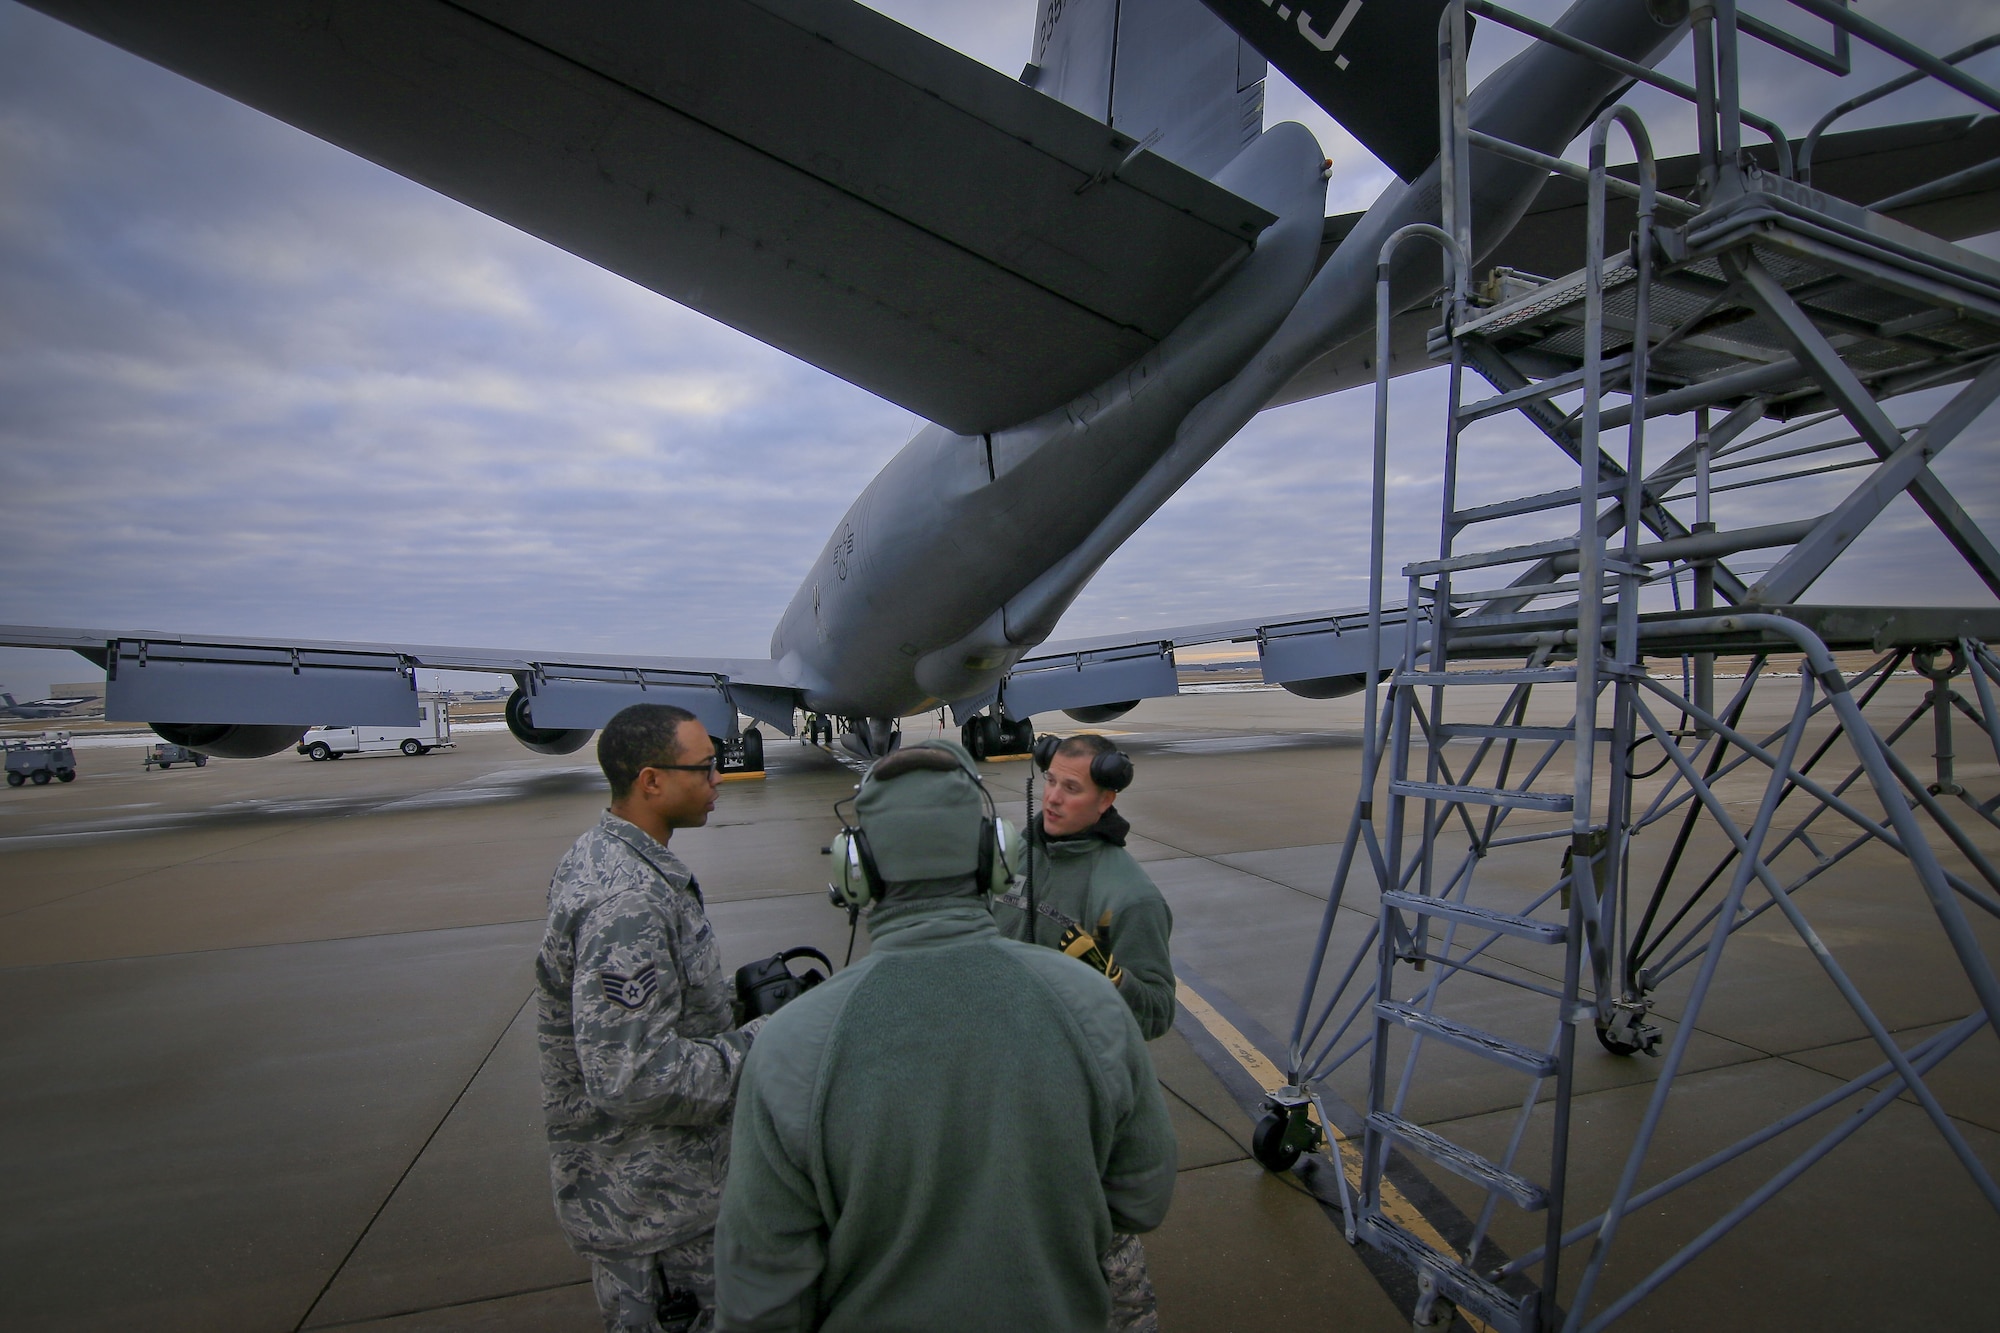 New Jersey Air National Guard Staff Sgt. Garion Reddick, left, an aircraft electronics specialist, talks with KC-135R crew chiefs Tech. Sgt. Raymond DeMarco, center, and Staff Sgt. Robert Cento, right, about a lighting issue on Joint Base McGuire-Dix-Lakehurst, N.J., Jan. 11, 2018. All three airmen are assigned to the 108th Wing. (U.S. Air National Guard photo by Master Sgt. Matt Hecht)